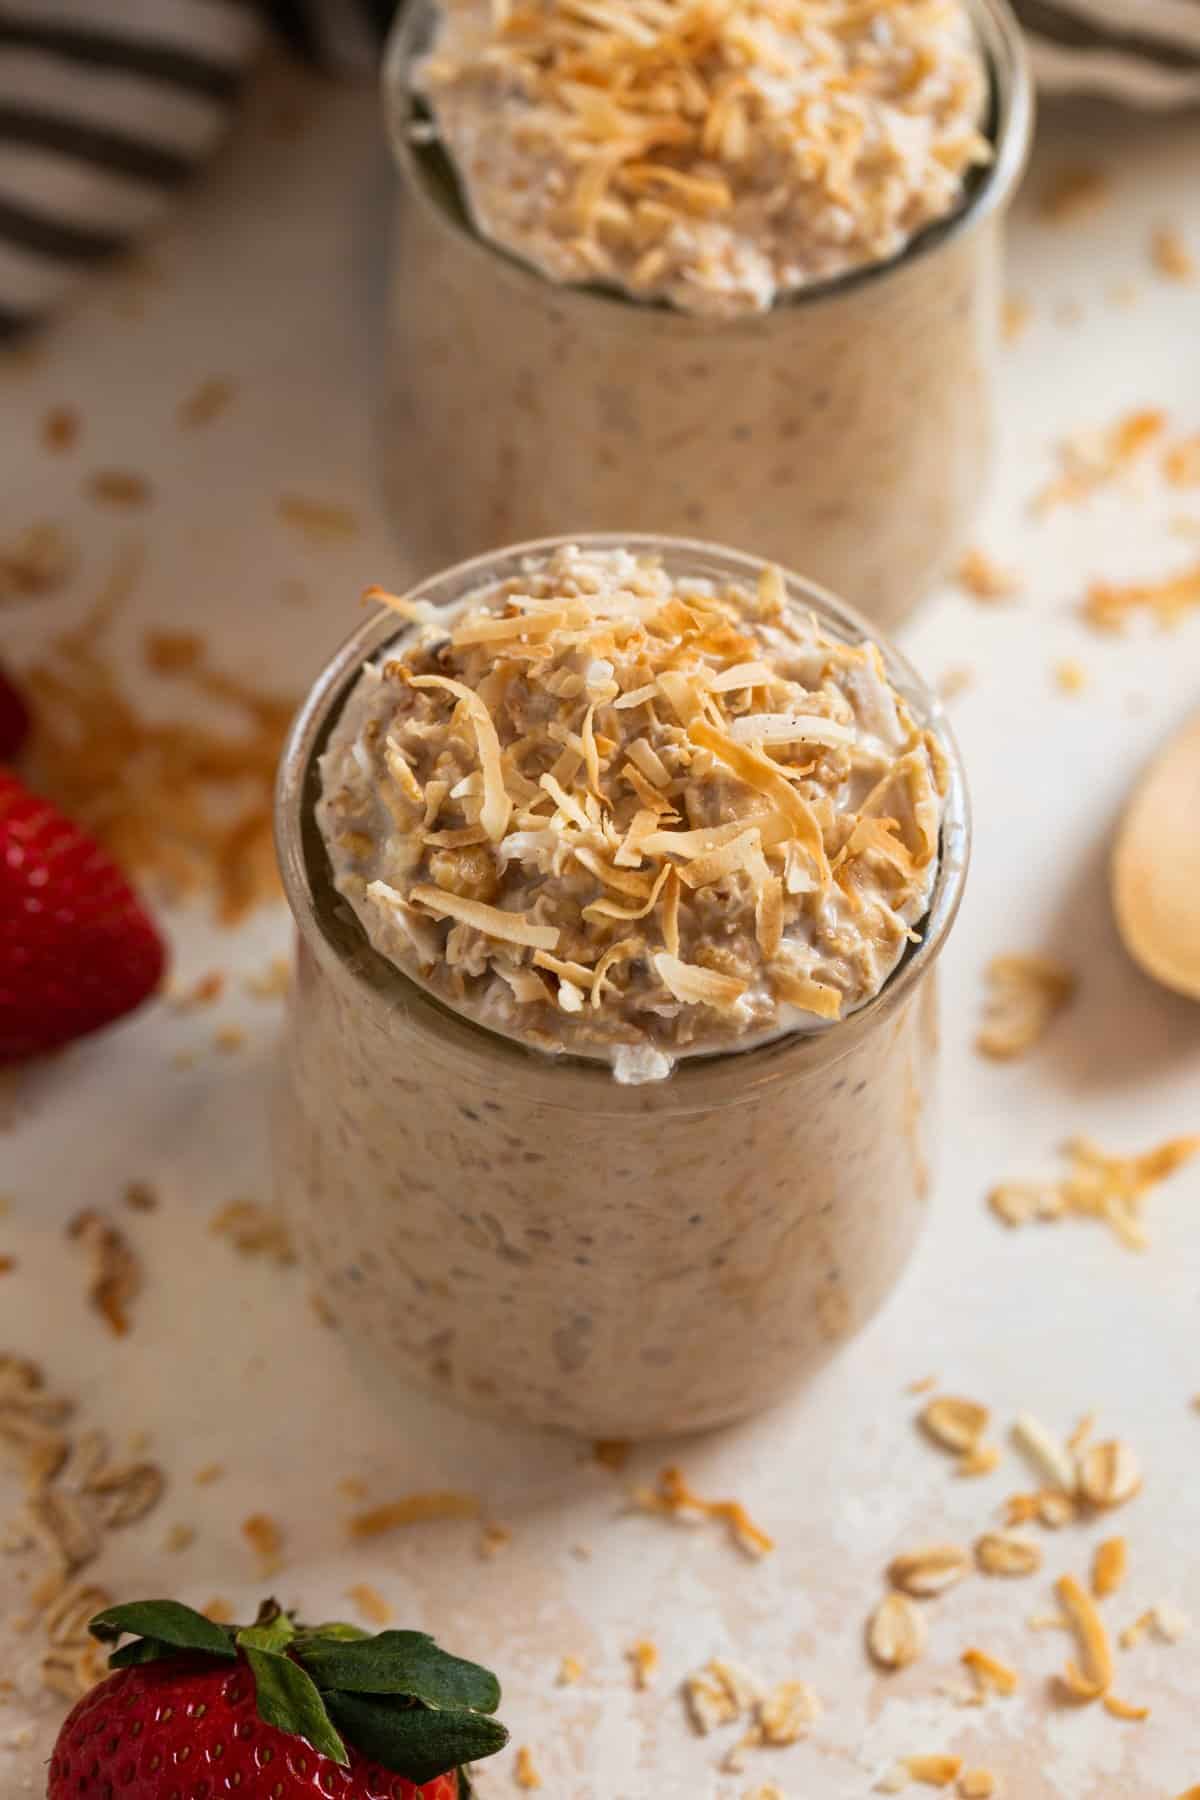 Jar of overnight oatmeal with coconut shredded over top.